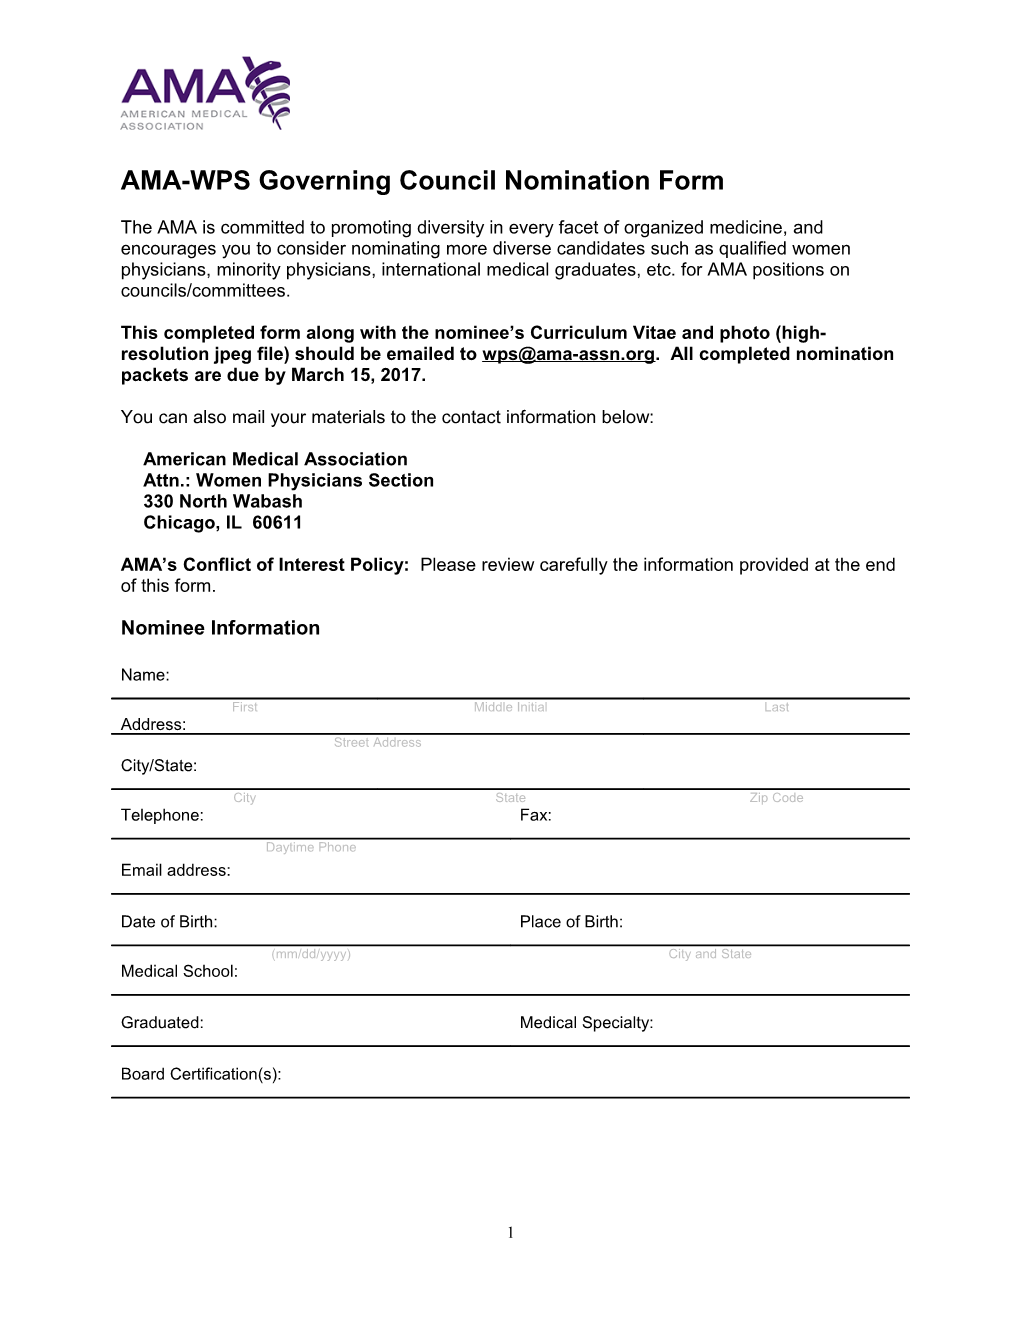 AMA Council/Committee Nomination Form